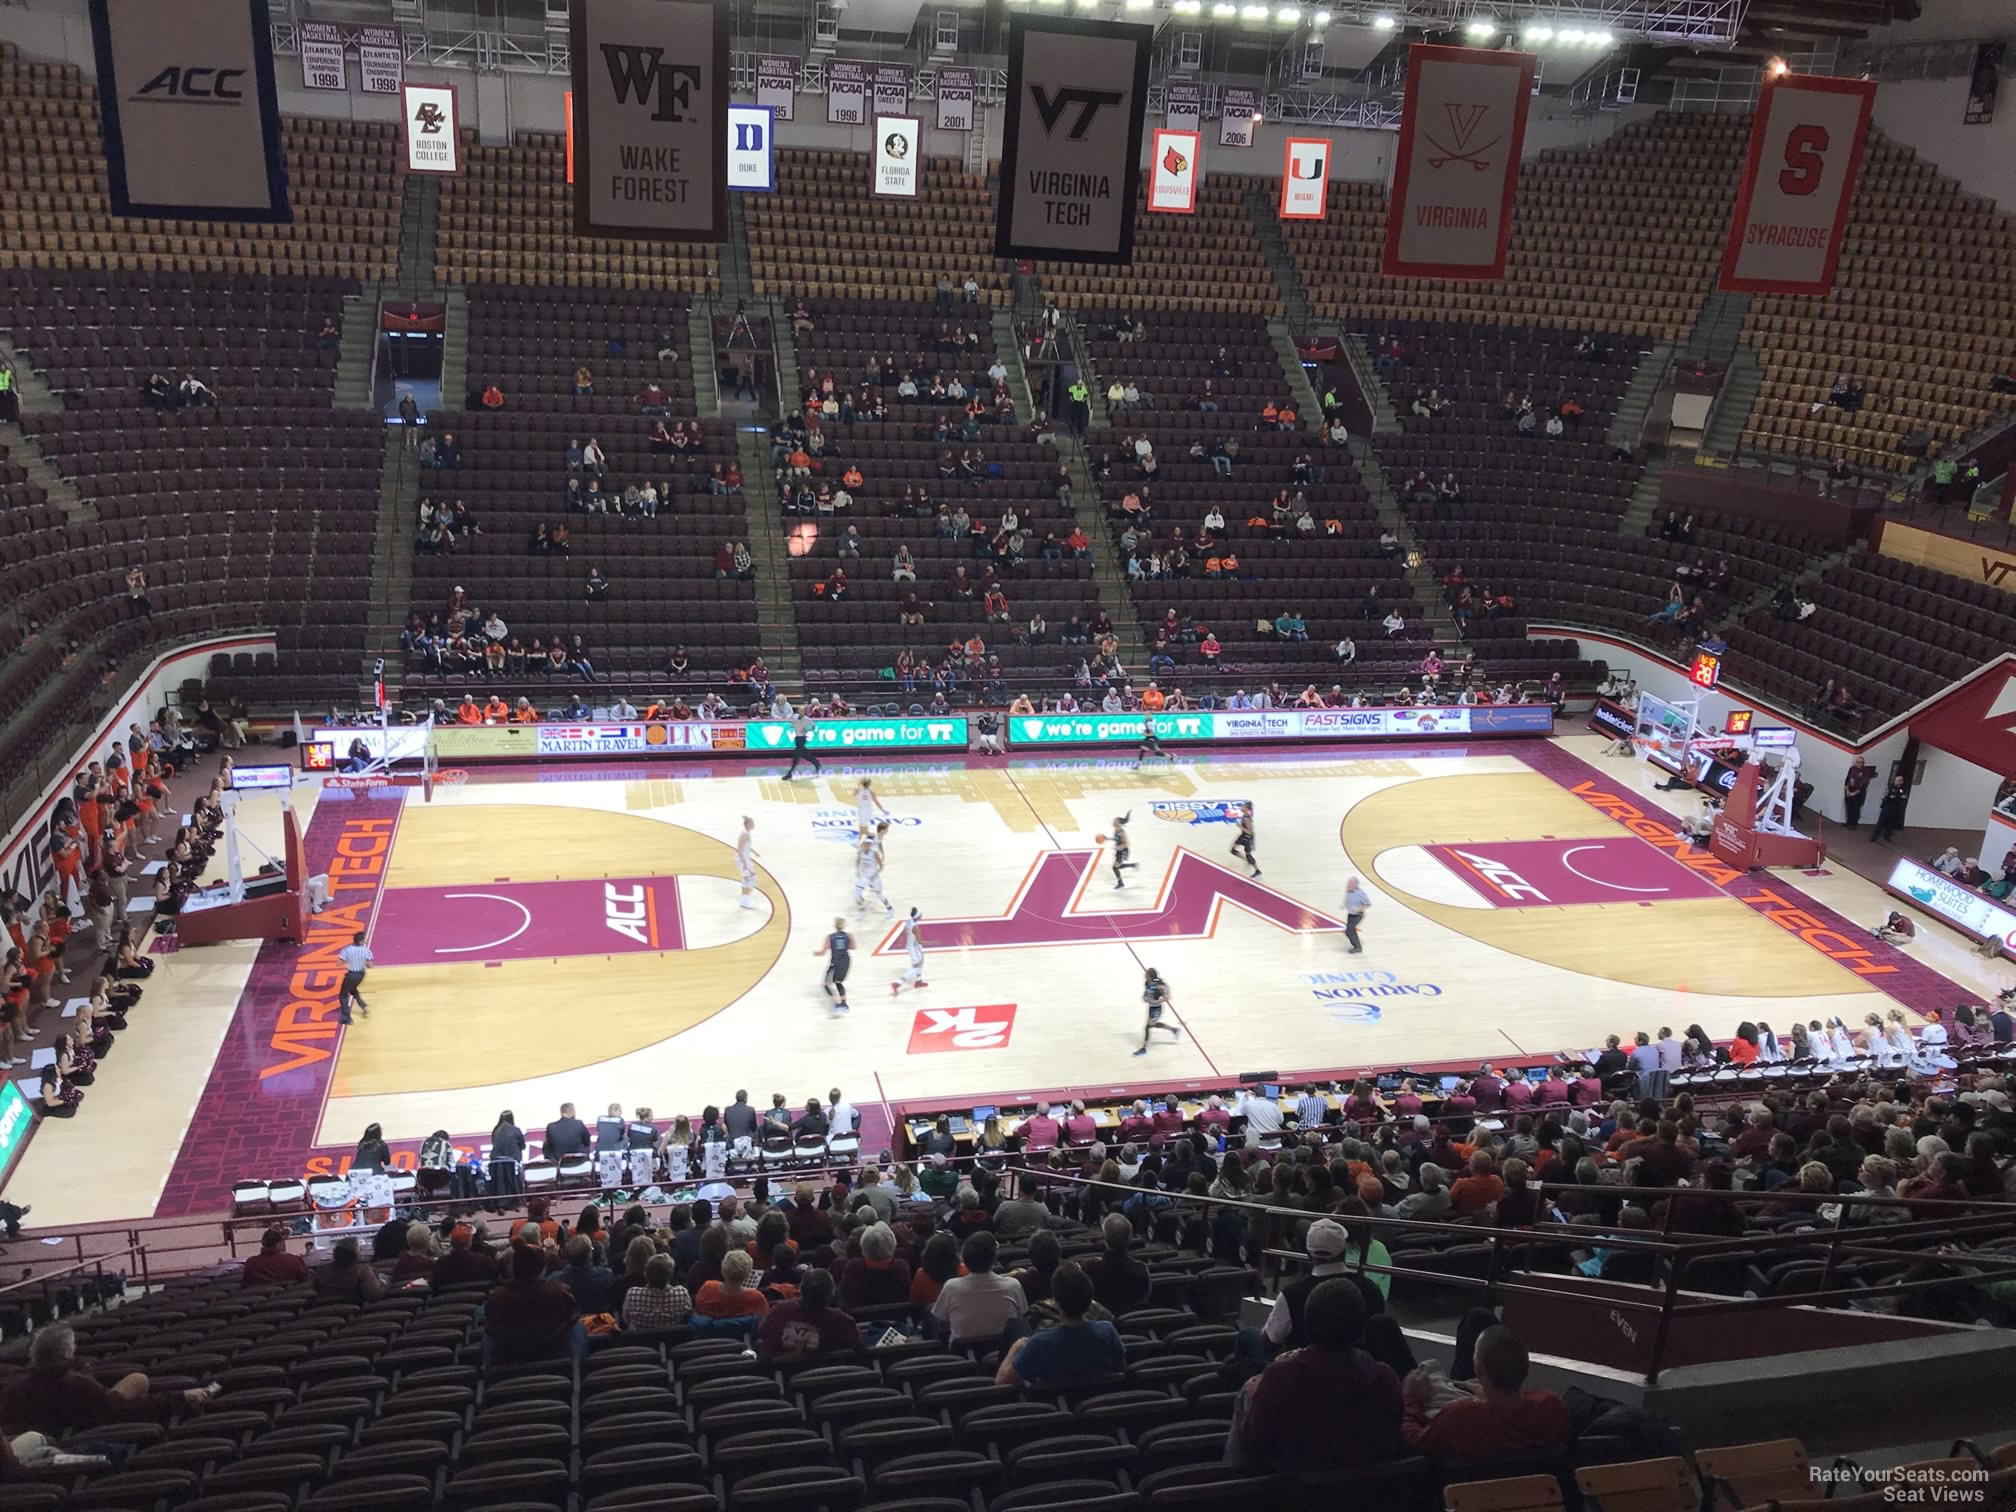 section 8, row bb seat view  - cassell coliseum